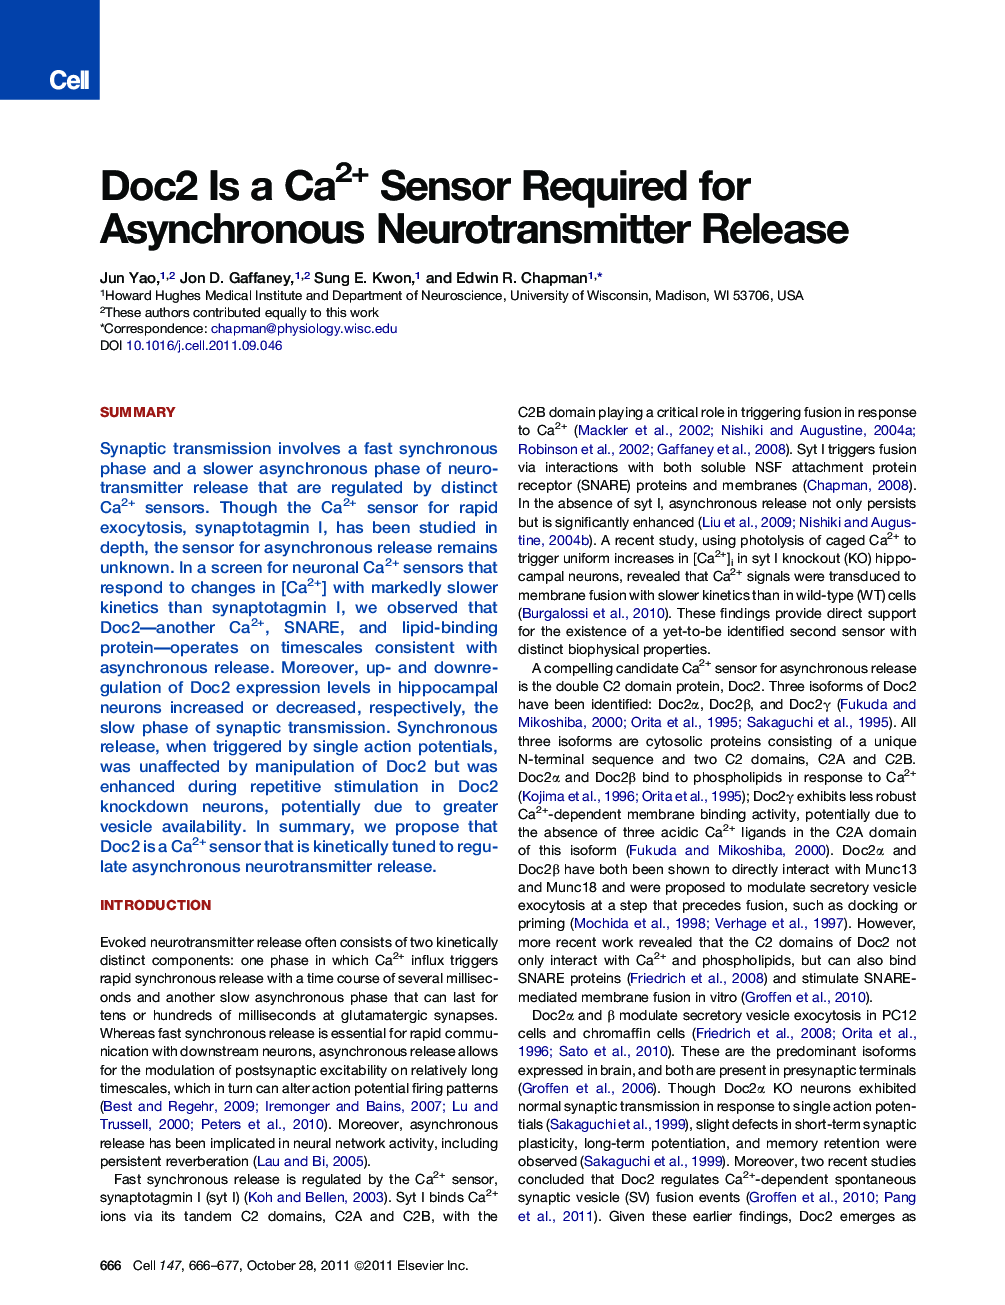 Doc2 Is a Ca2+ Sensor Required for Asynchronous Neurotransmitter Release